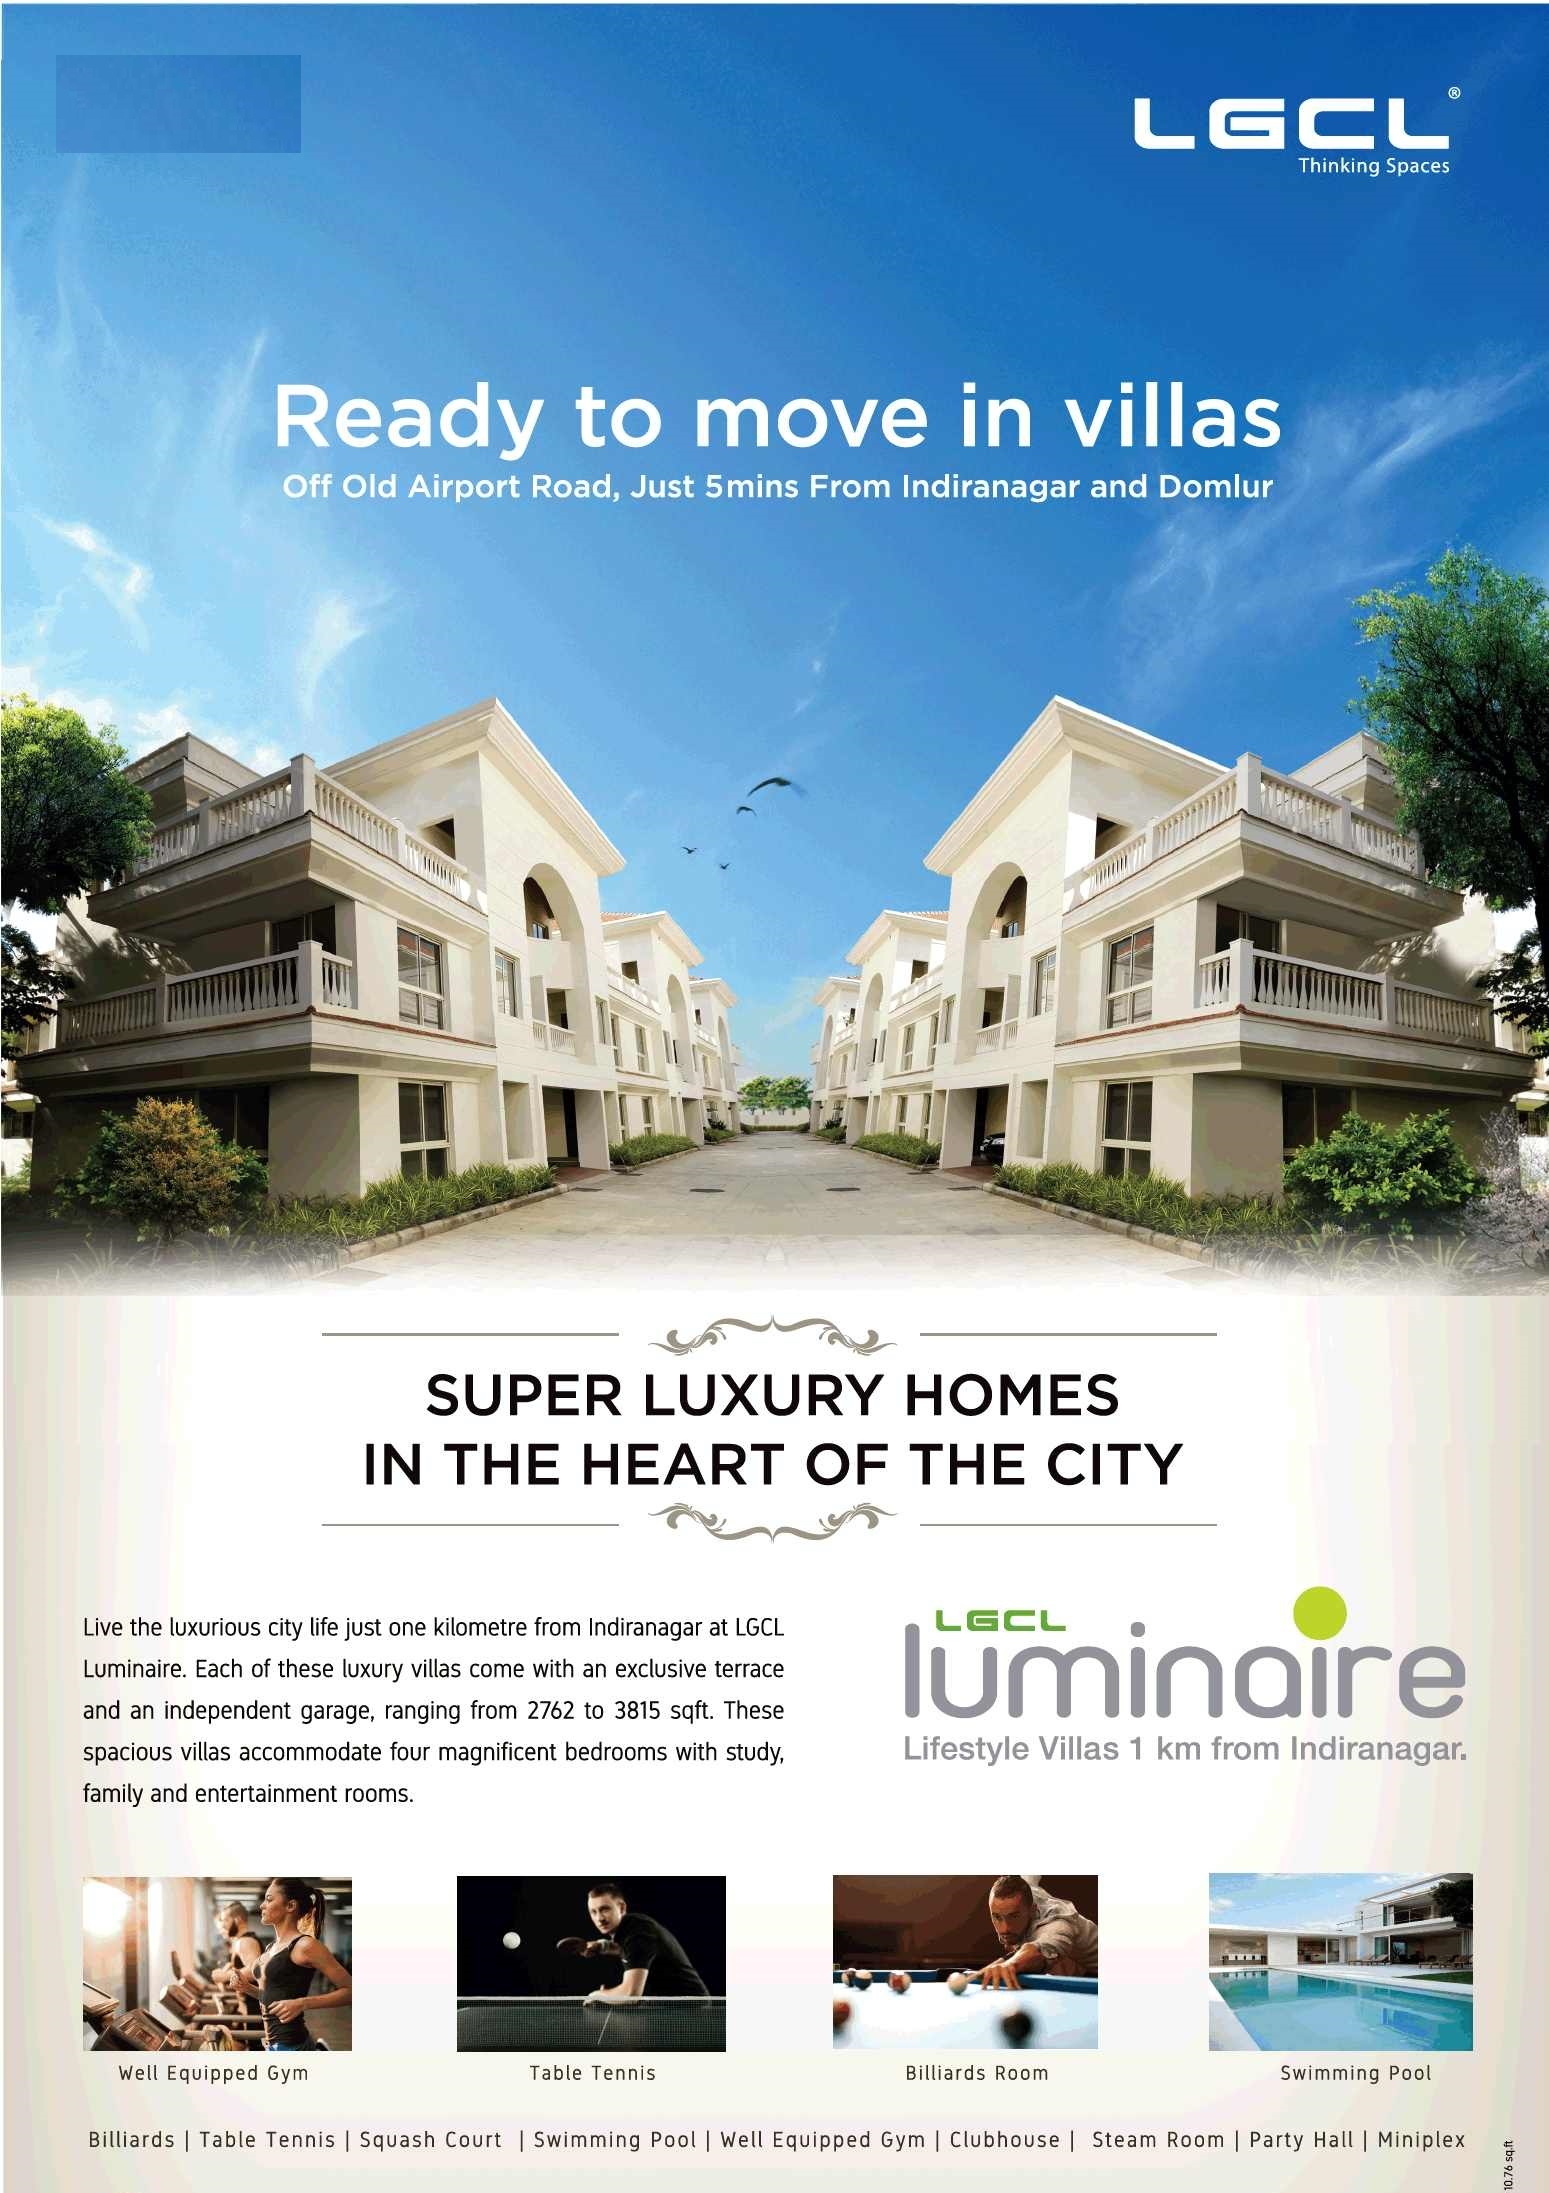 Book super luxury homes in the heart of the city at LGCL Luminaire in Bangalore Update